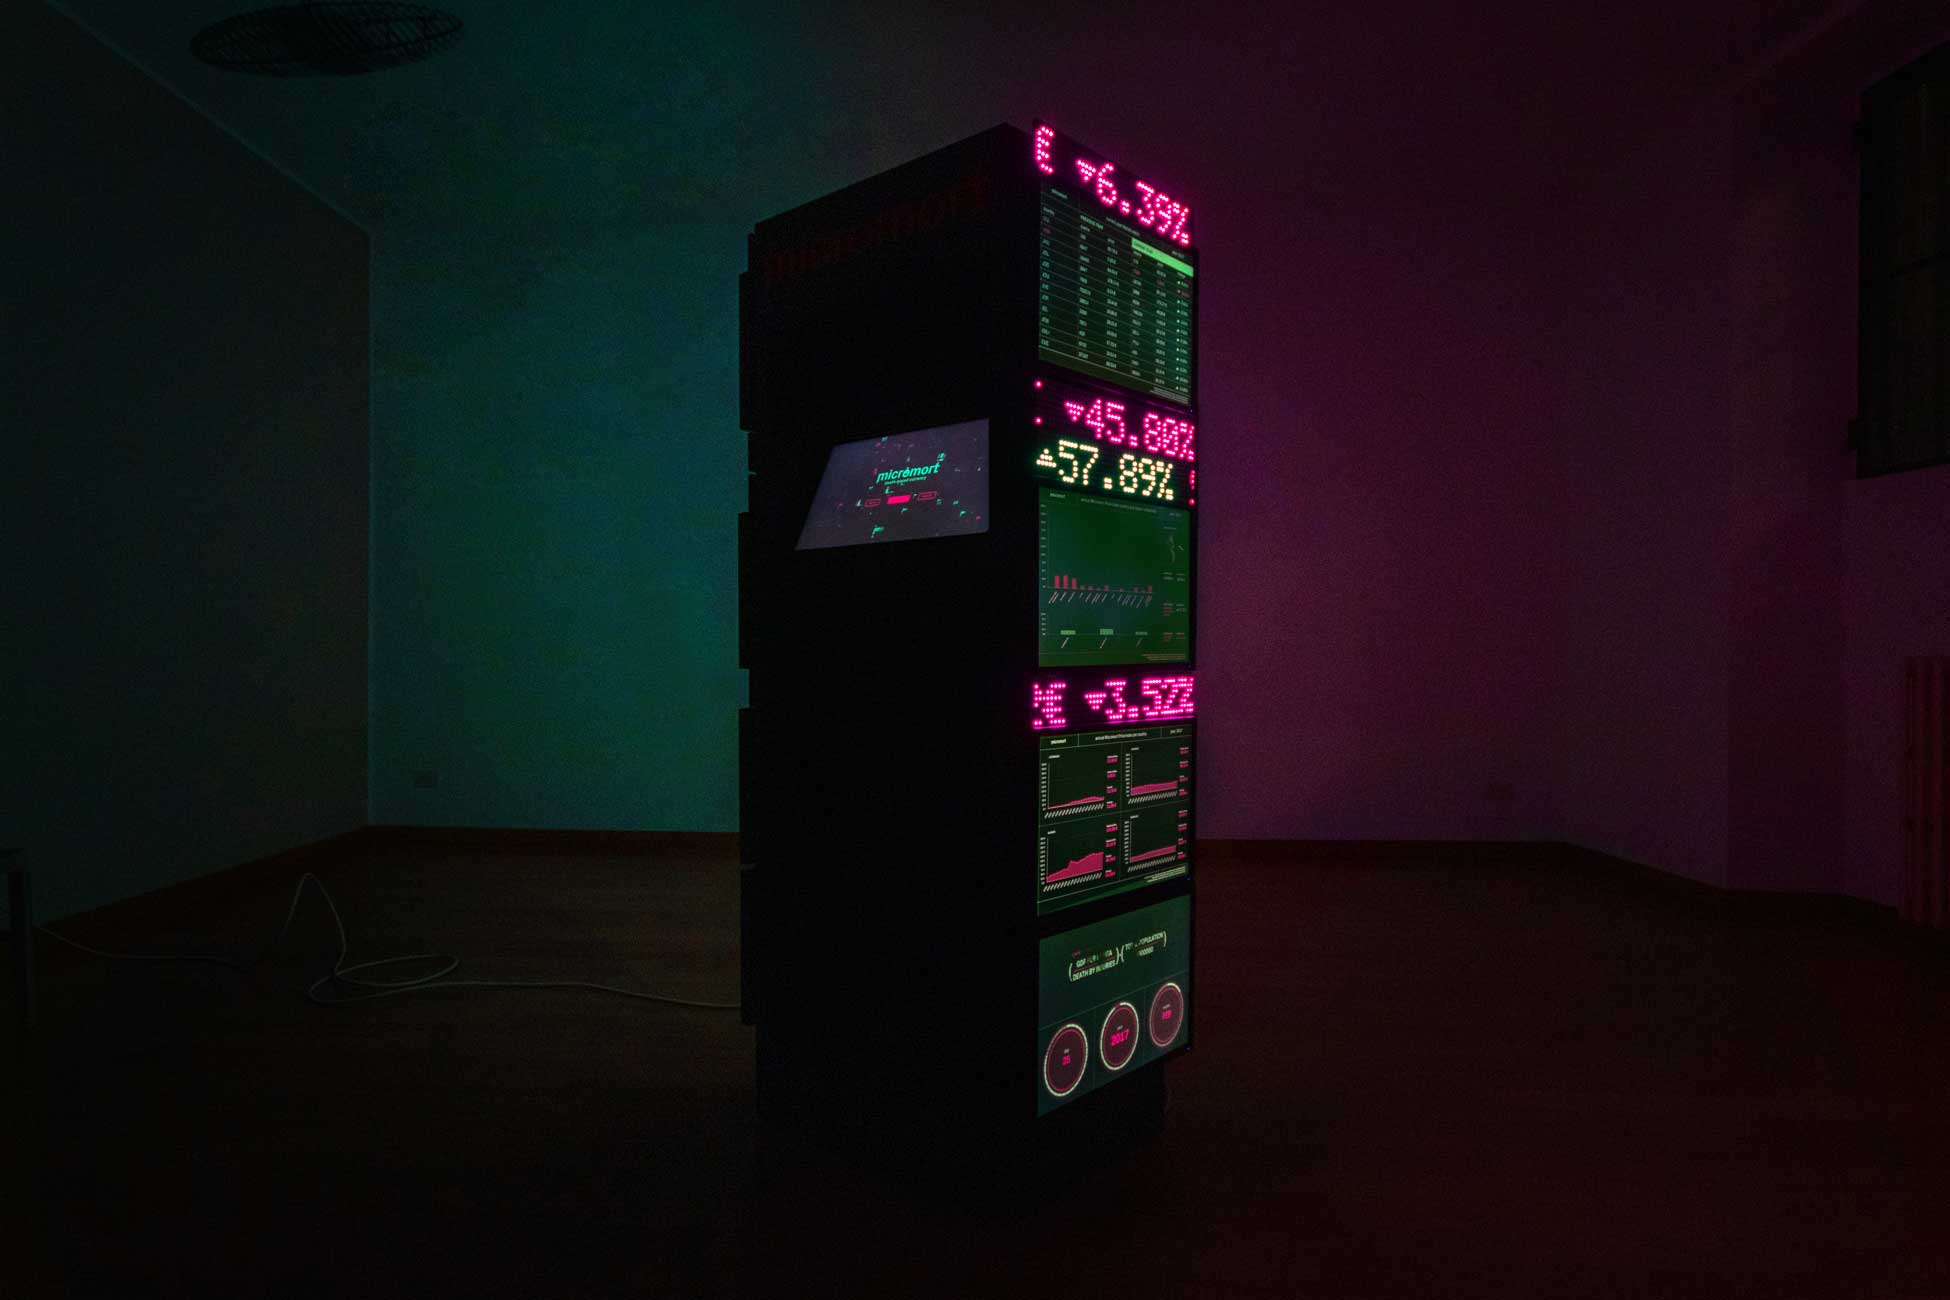 Micromort: Death-based Currency | Pietro Forino